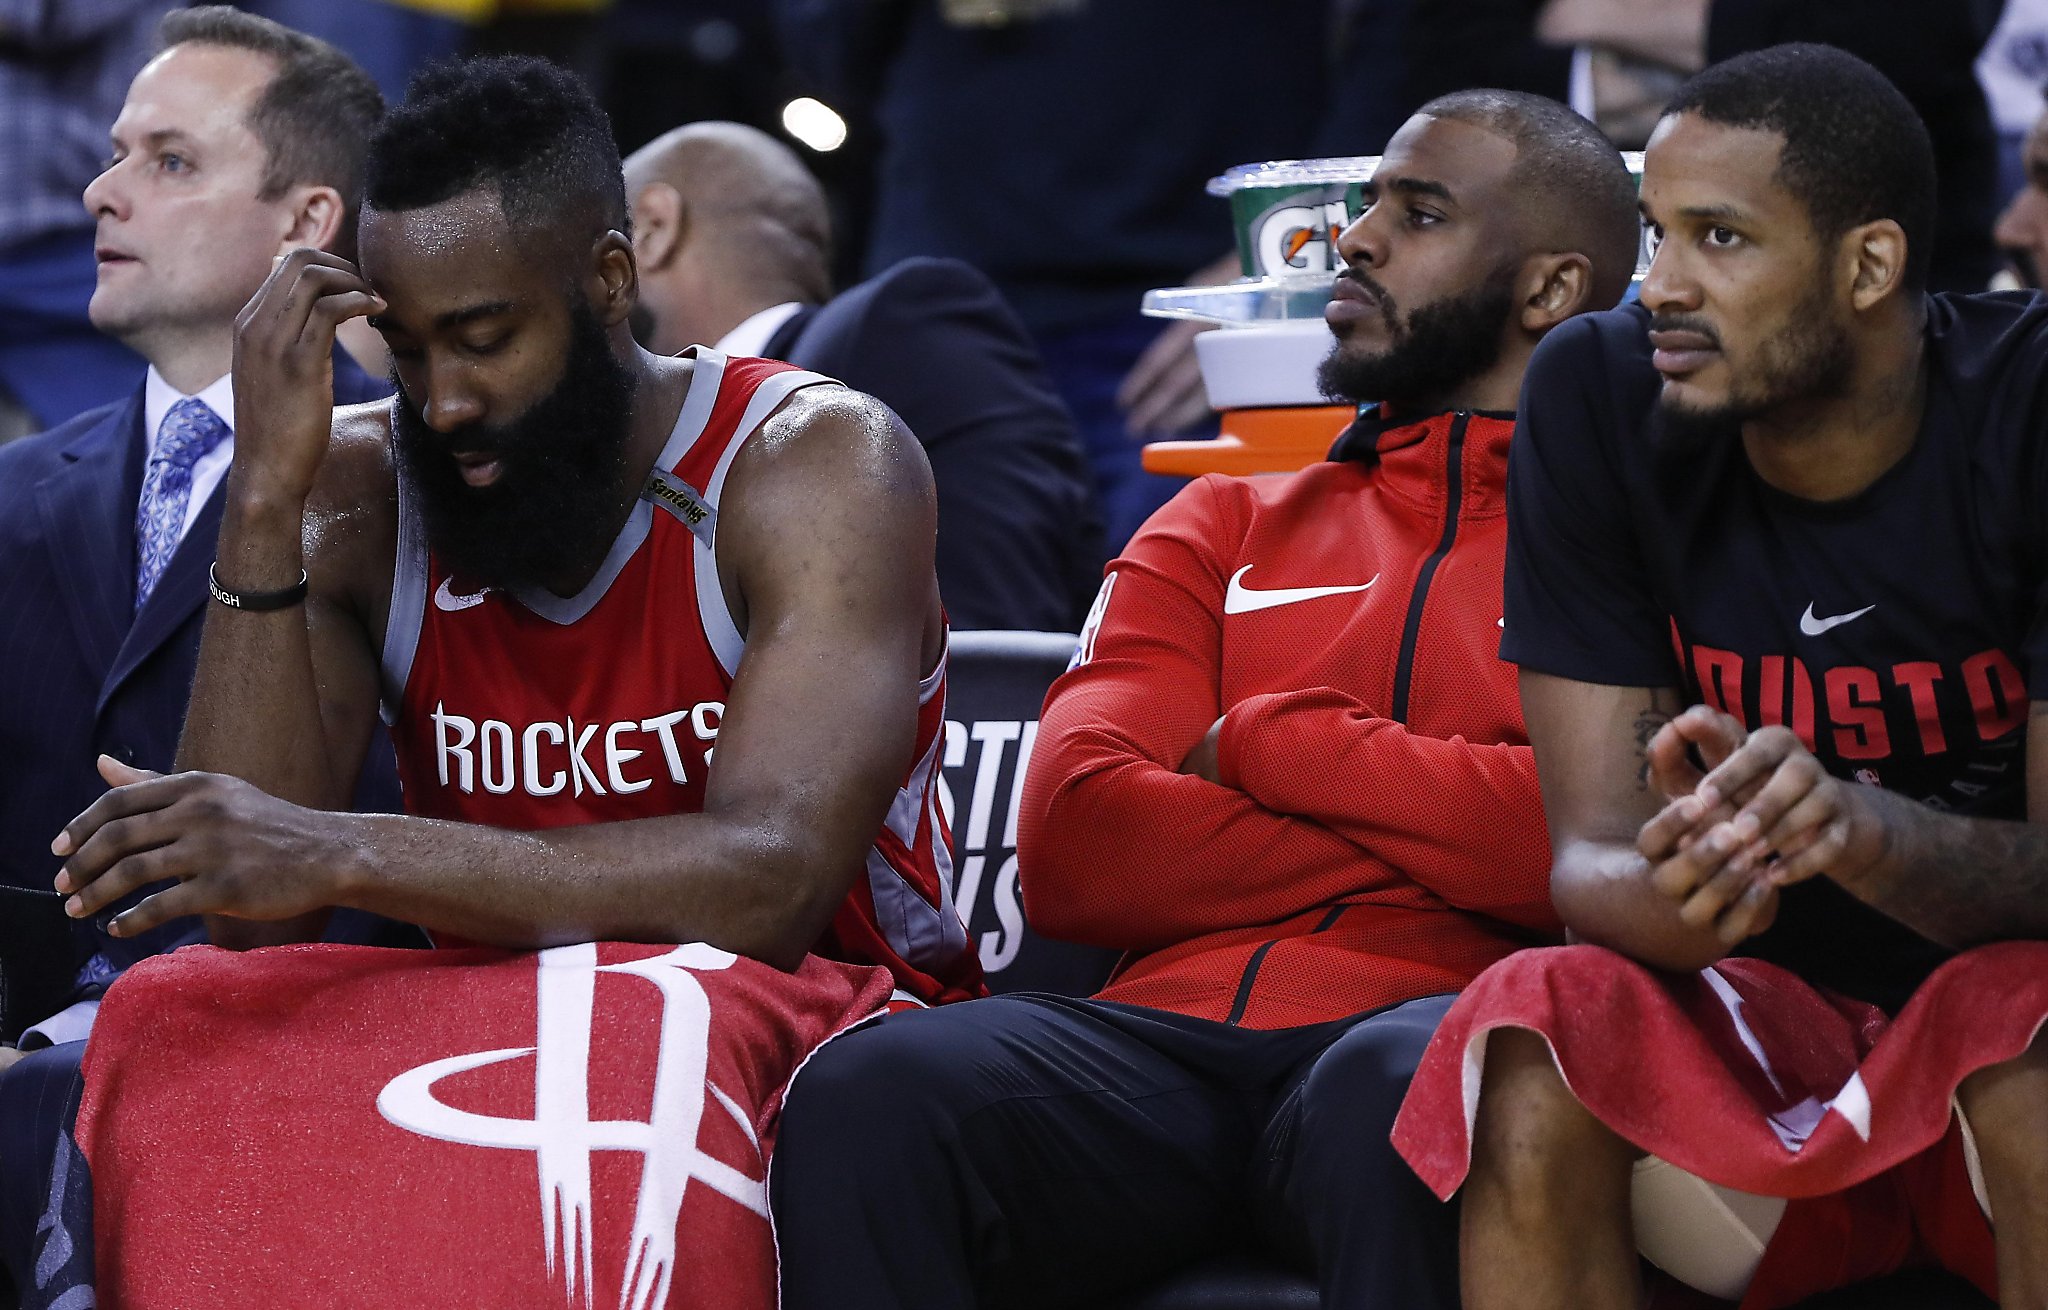 Chris Paul Won't Play in Game 7 vs. Warriors After Hamstring